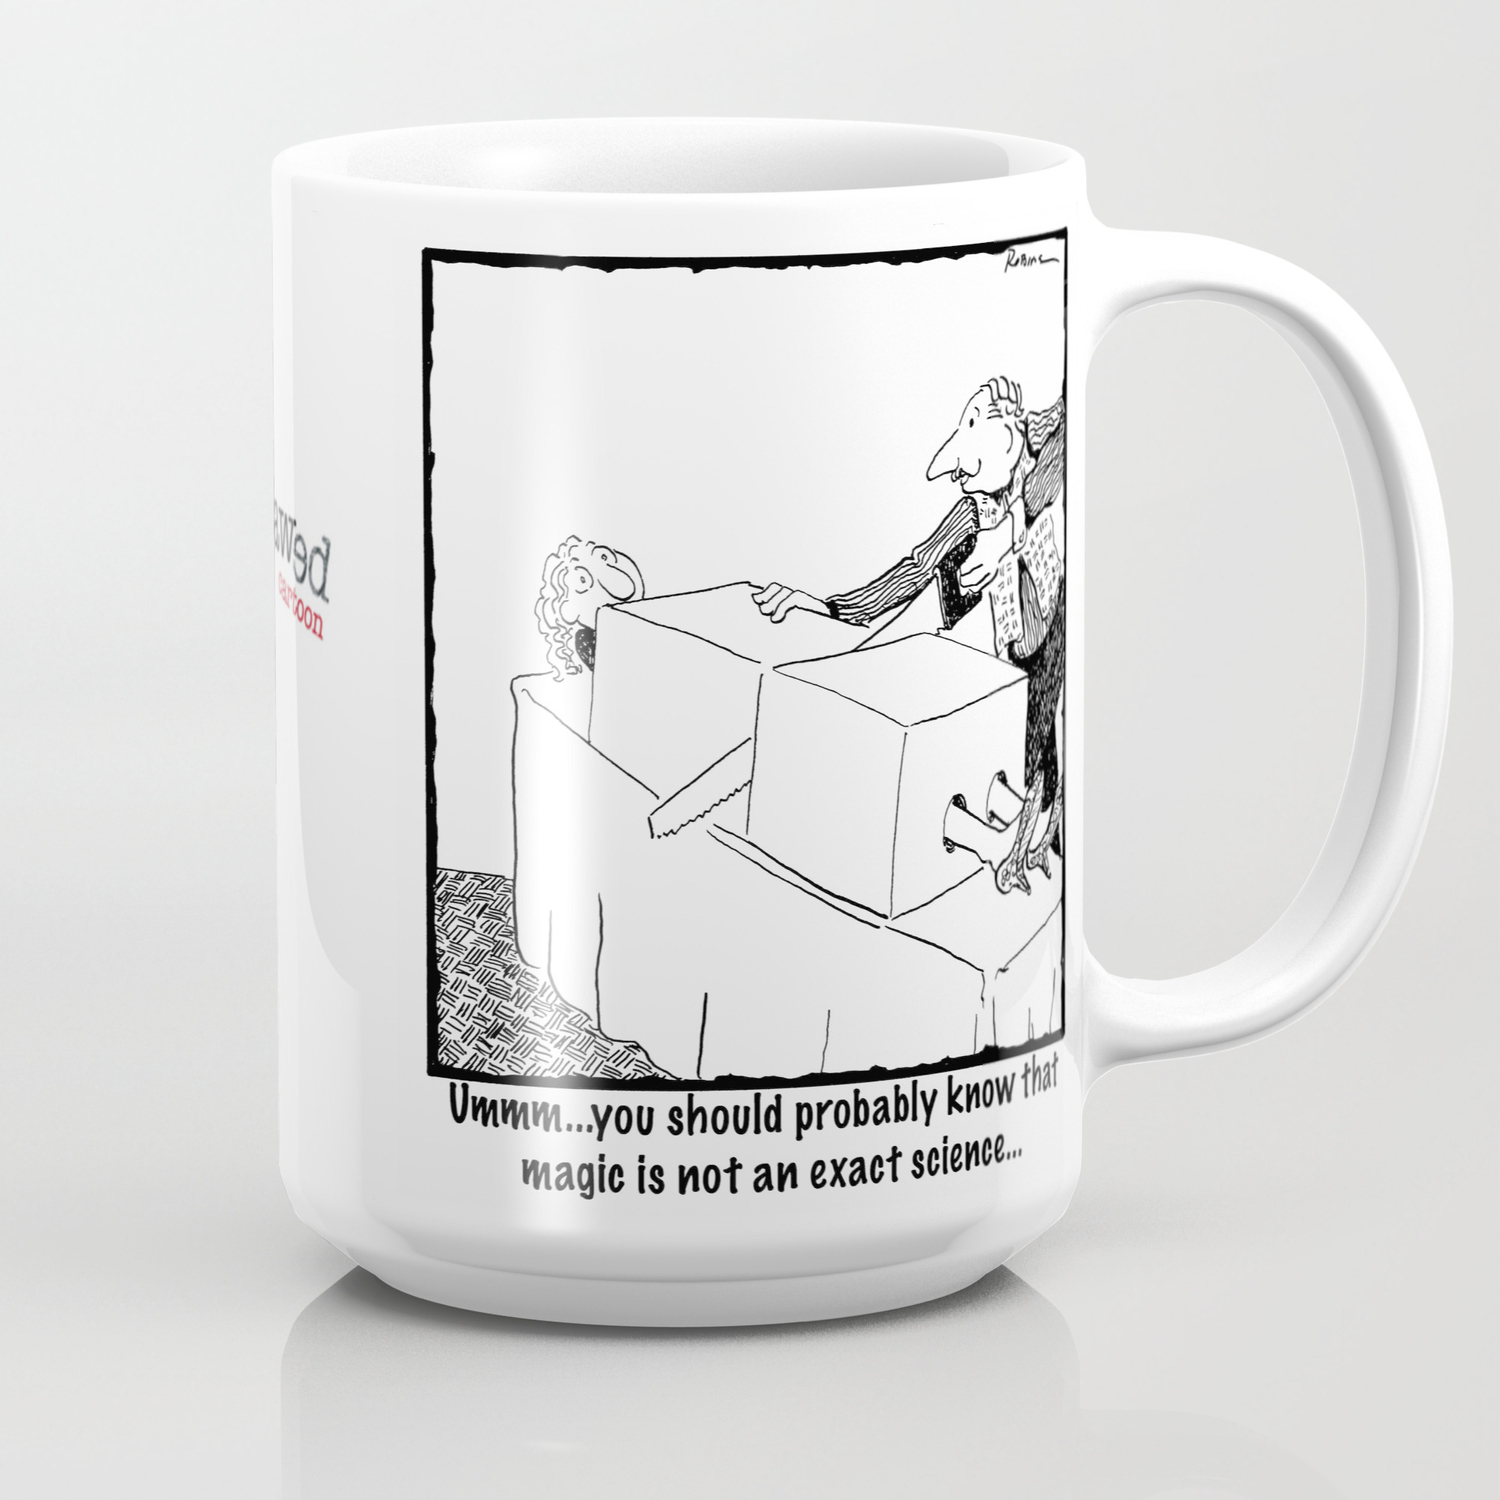 Details about   Craft Life Mug White Two Tone Coffee Cup Crafty Room Creative Expression Time Cu 